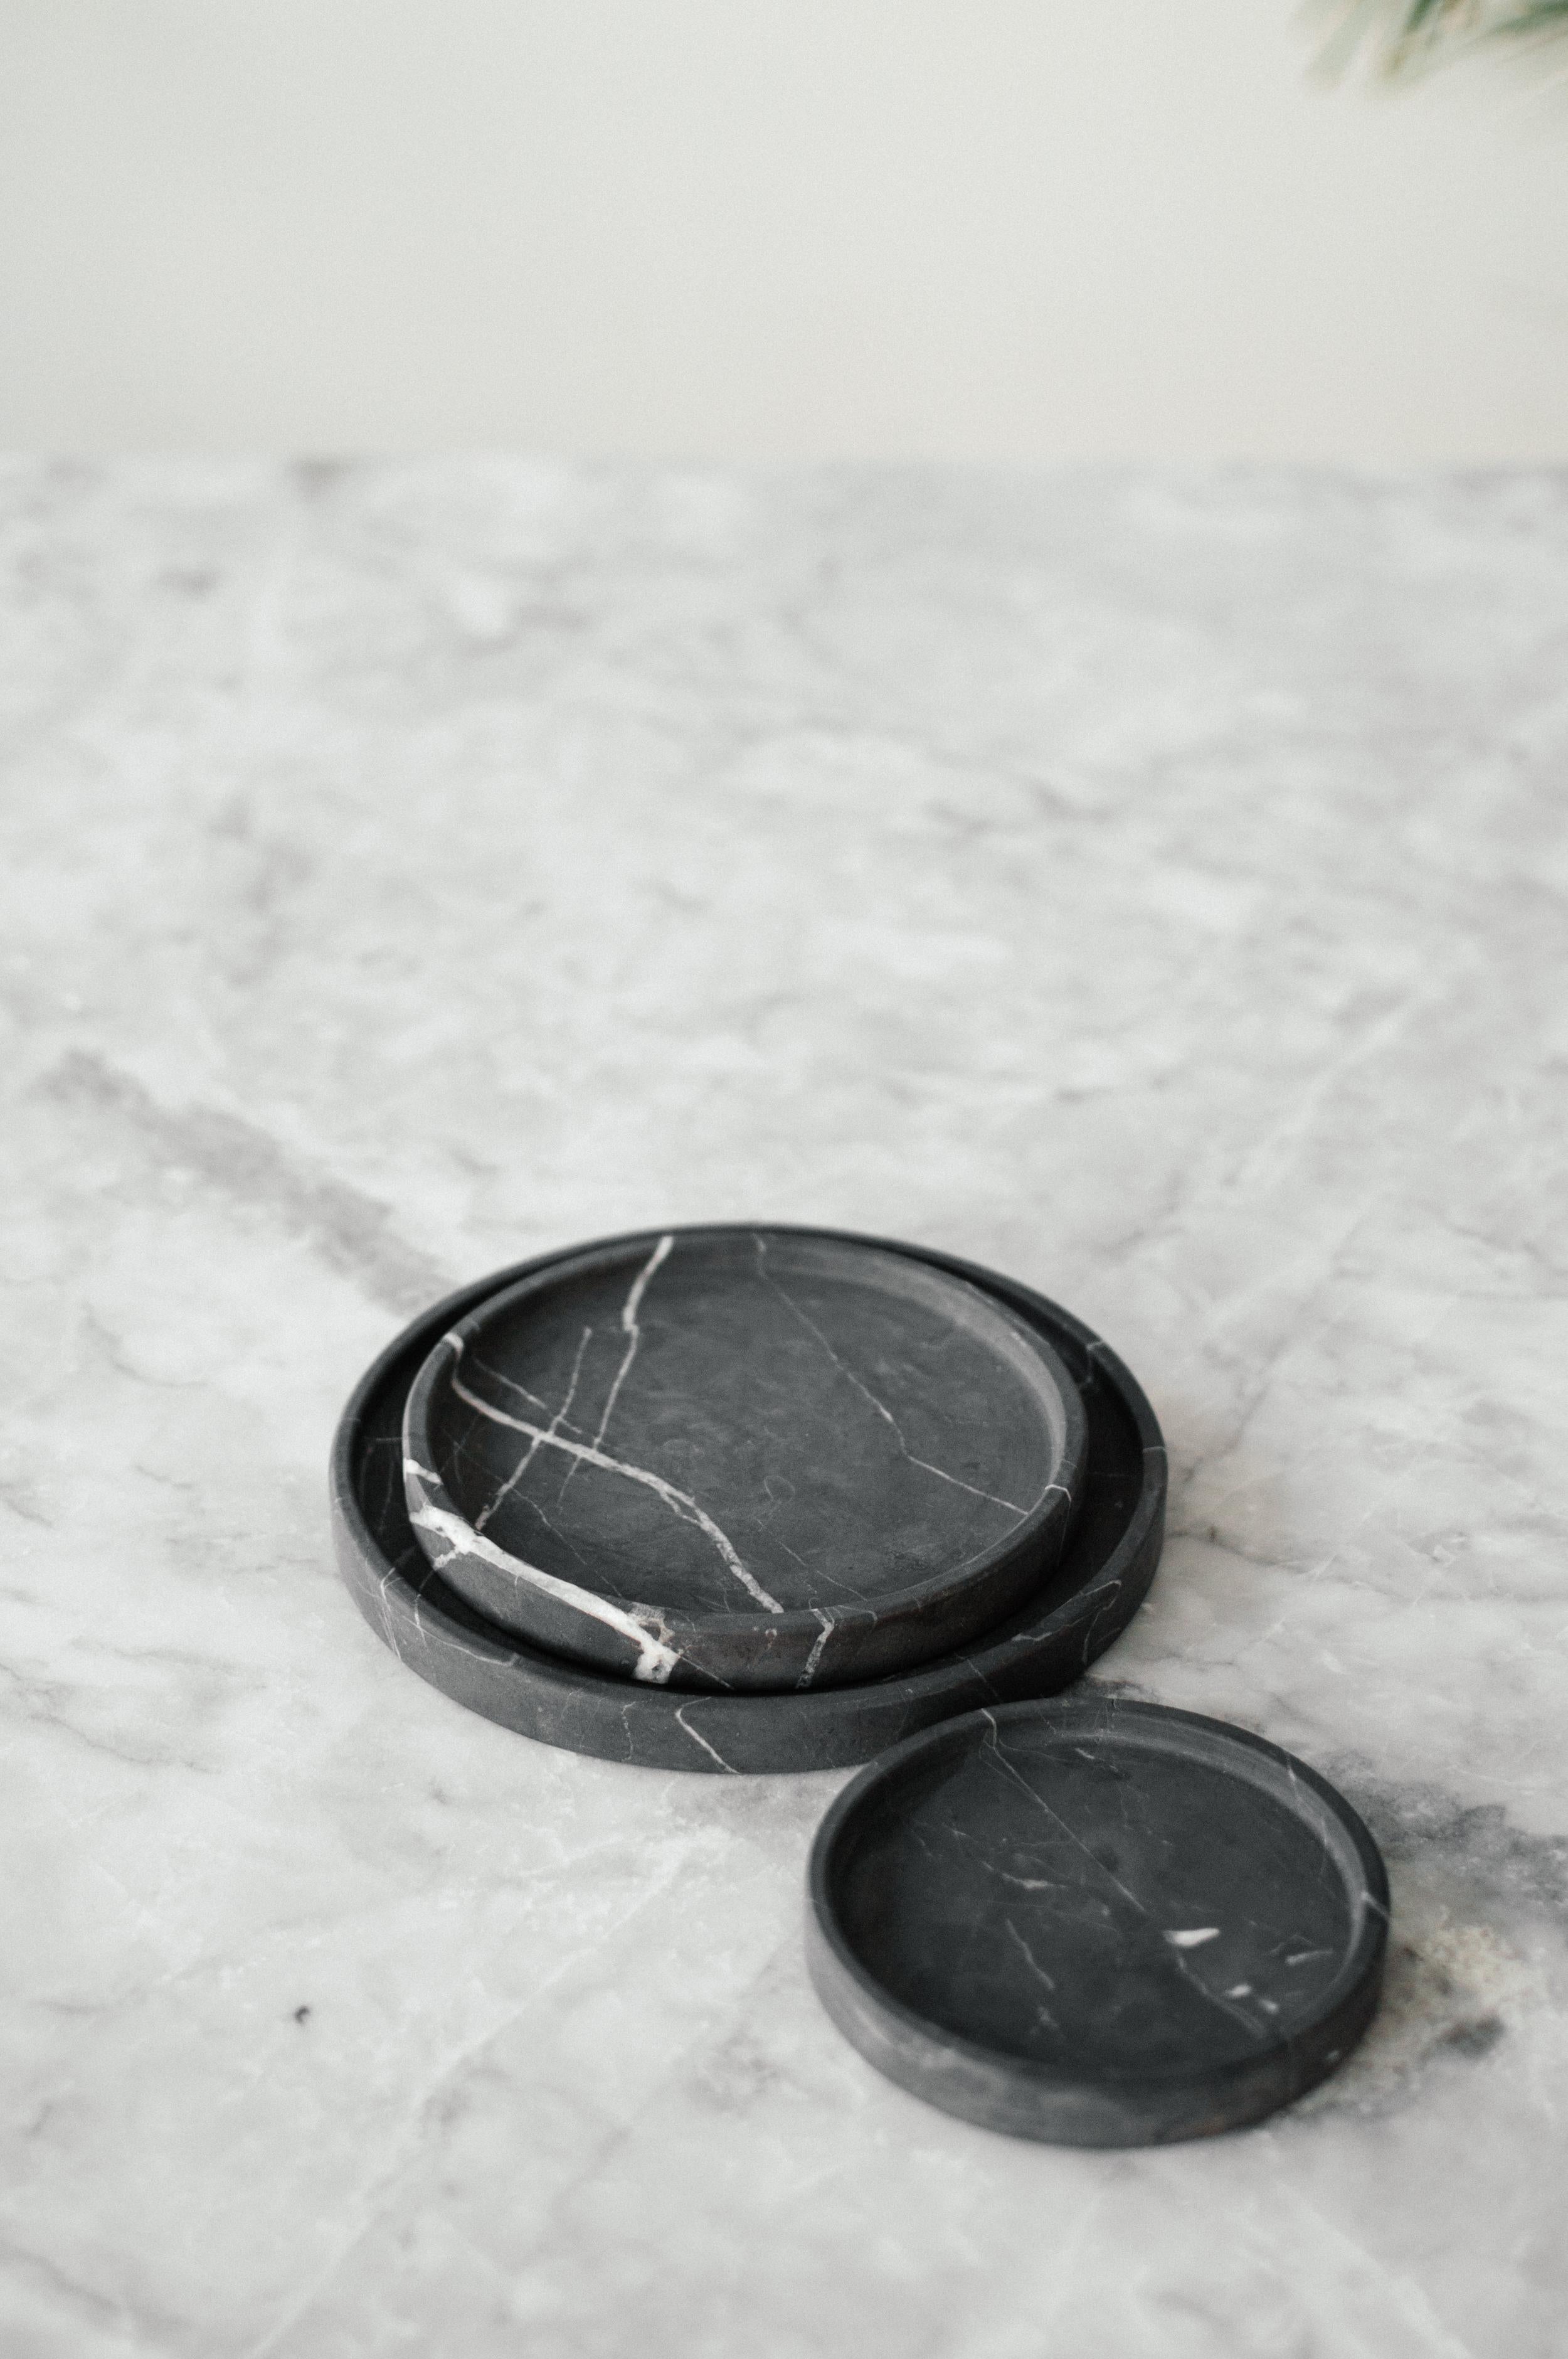 Plates in Monterrey black marble. Handmade in Mexico by local craftsmen.   Dimensions:  Small: 20 D x 20 W x 2 H cm Medium: 16 D x 16 W x 2 H cm Large: 12 D x 12 W x 2 H cm.  Production time: 6-8 weeks for items without marble / 13-14 weeks for